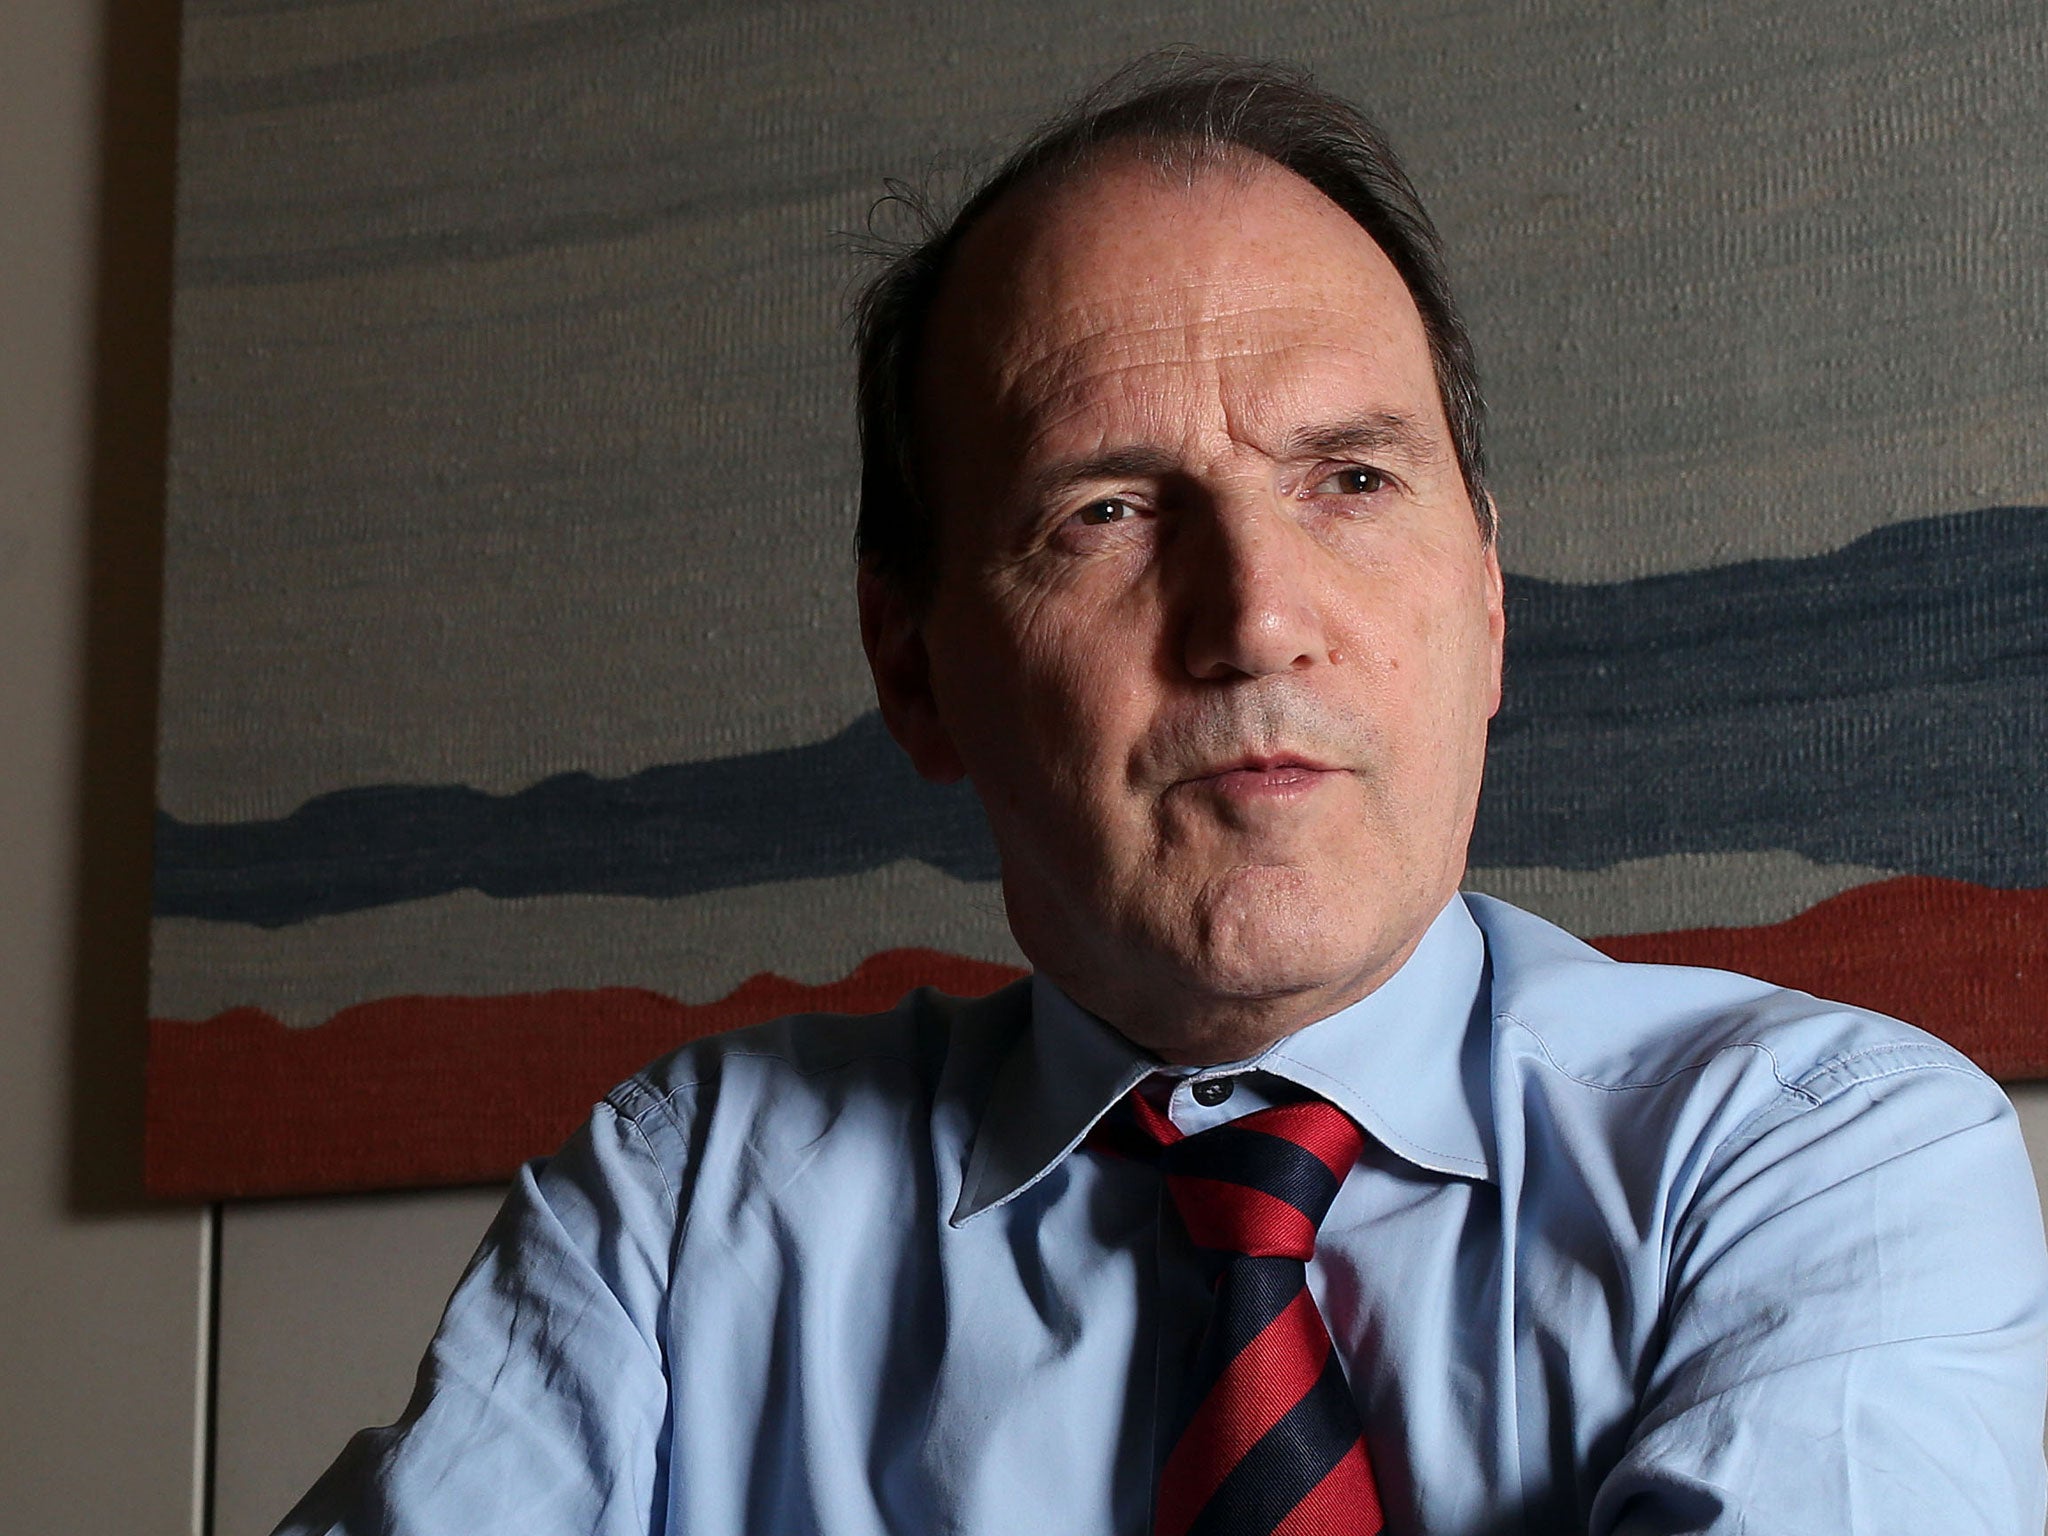 Simon Hughes says some view the criminal justice system as hostile